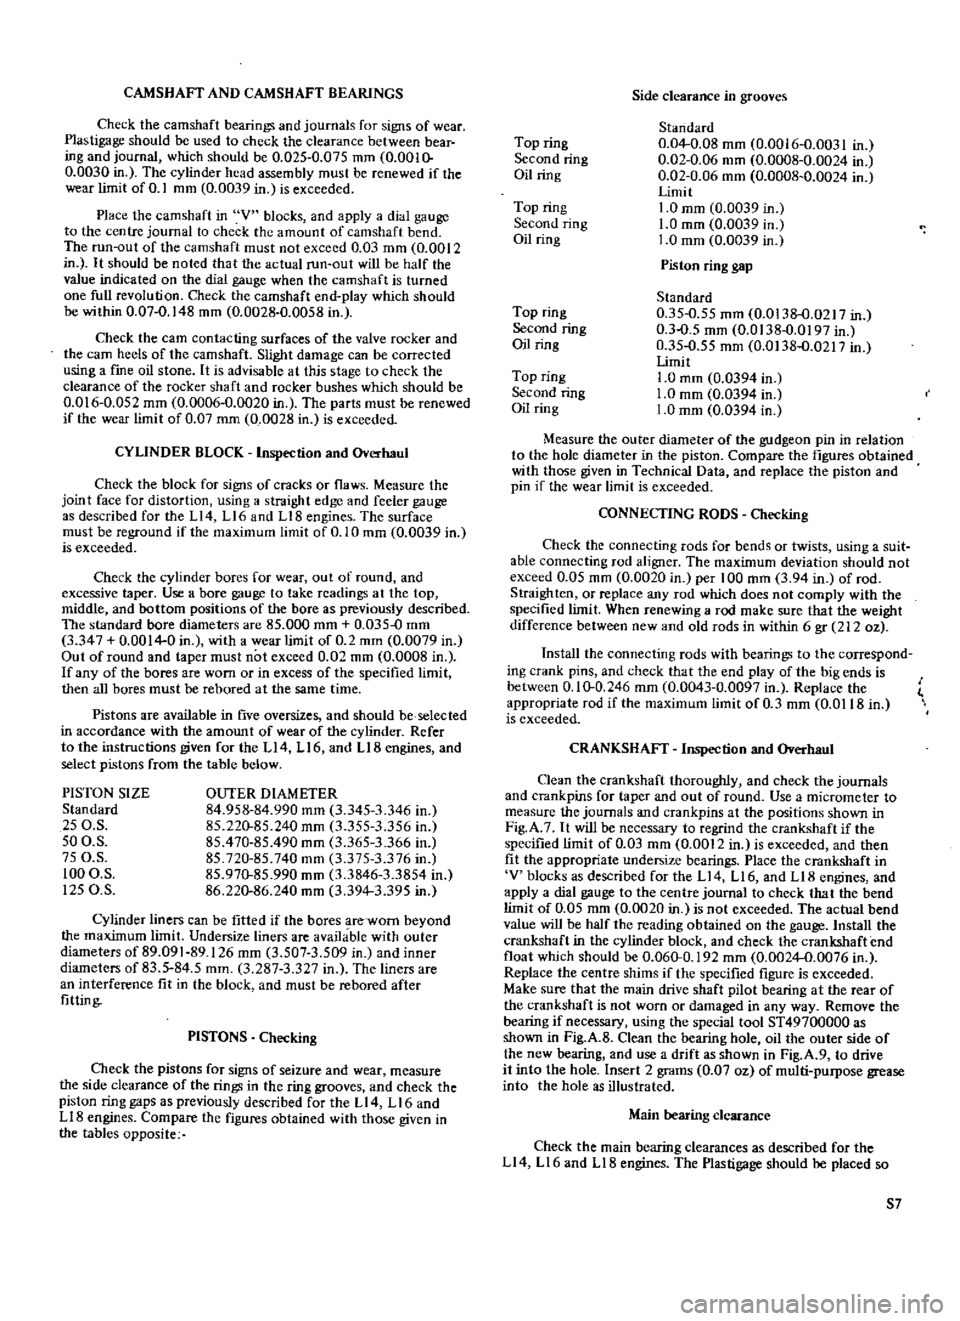 DATSUN 610 1969  Workshop Manual 
CAMSHAFT 
AND 
CAMSHAFT 
BEARINGS

Check 
the 
camshaft

bearing 
and

journals 
for

signs 
of 
wear

Plastigage 
should 
be

used 
to

check 
the 
clearance 
between 
bear

ing 
and

journal 
which